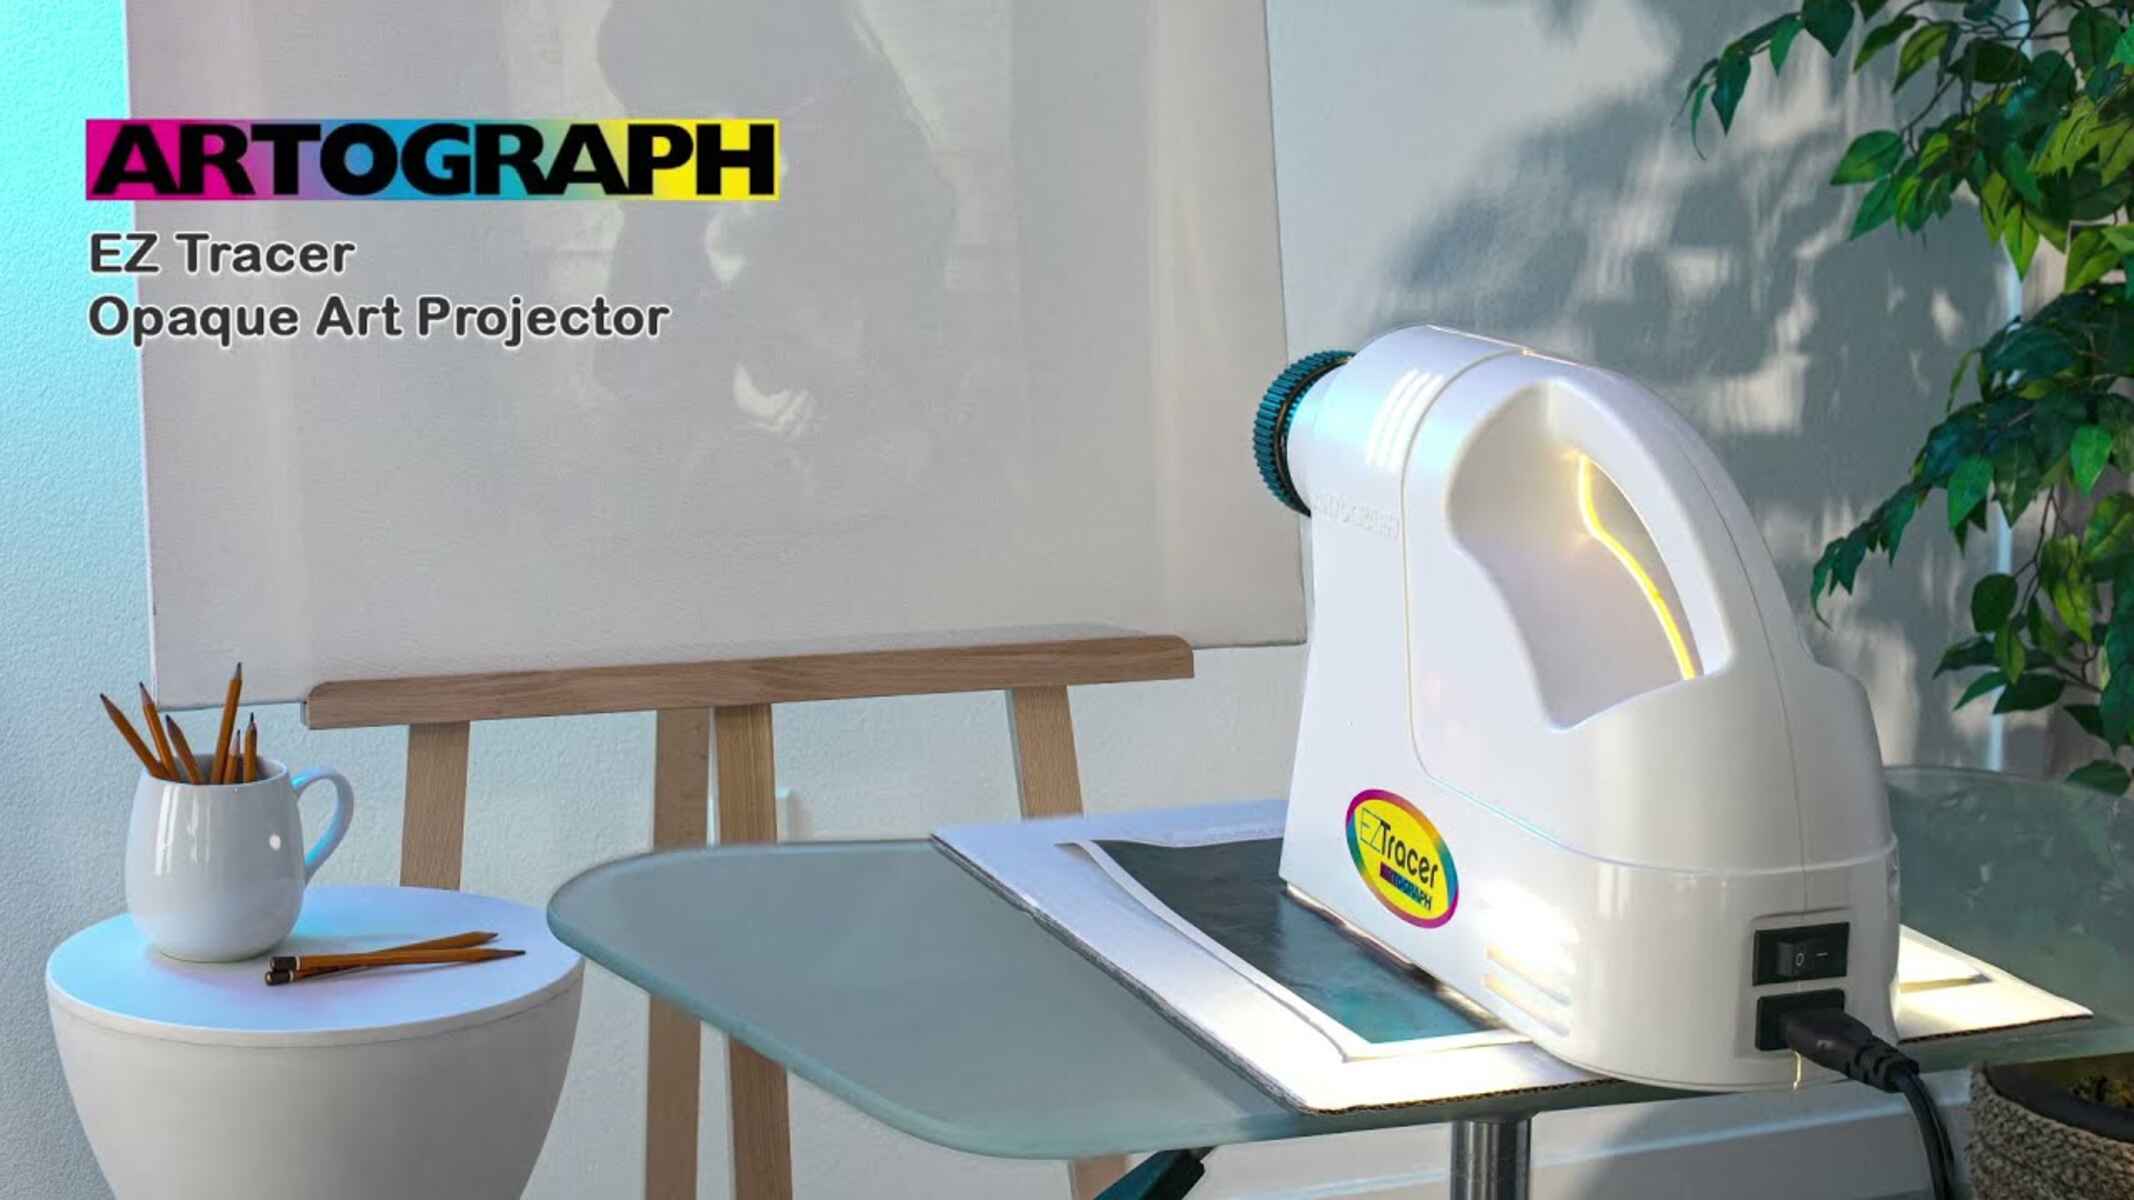 teaser como usar un proyector para trazar tu obra / how to use a projector  to trace your work 